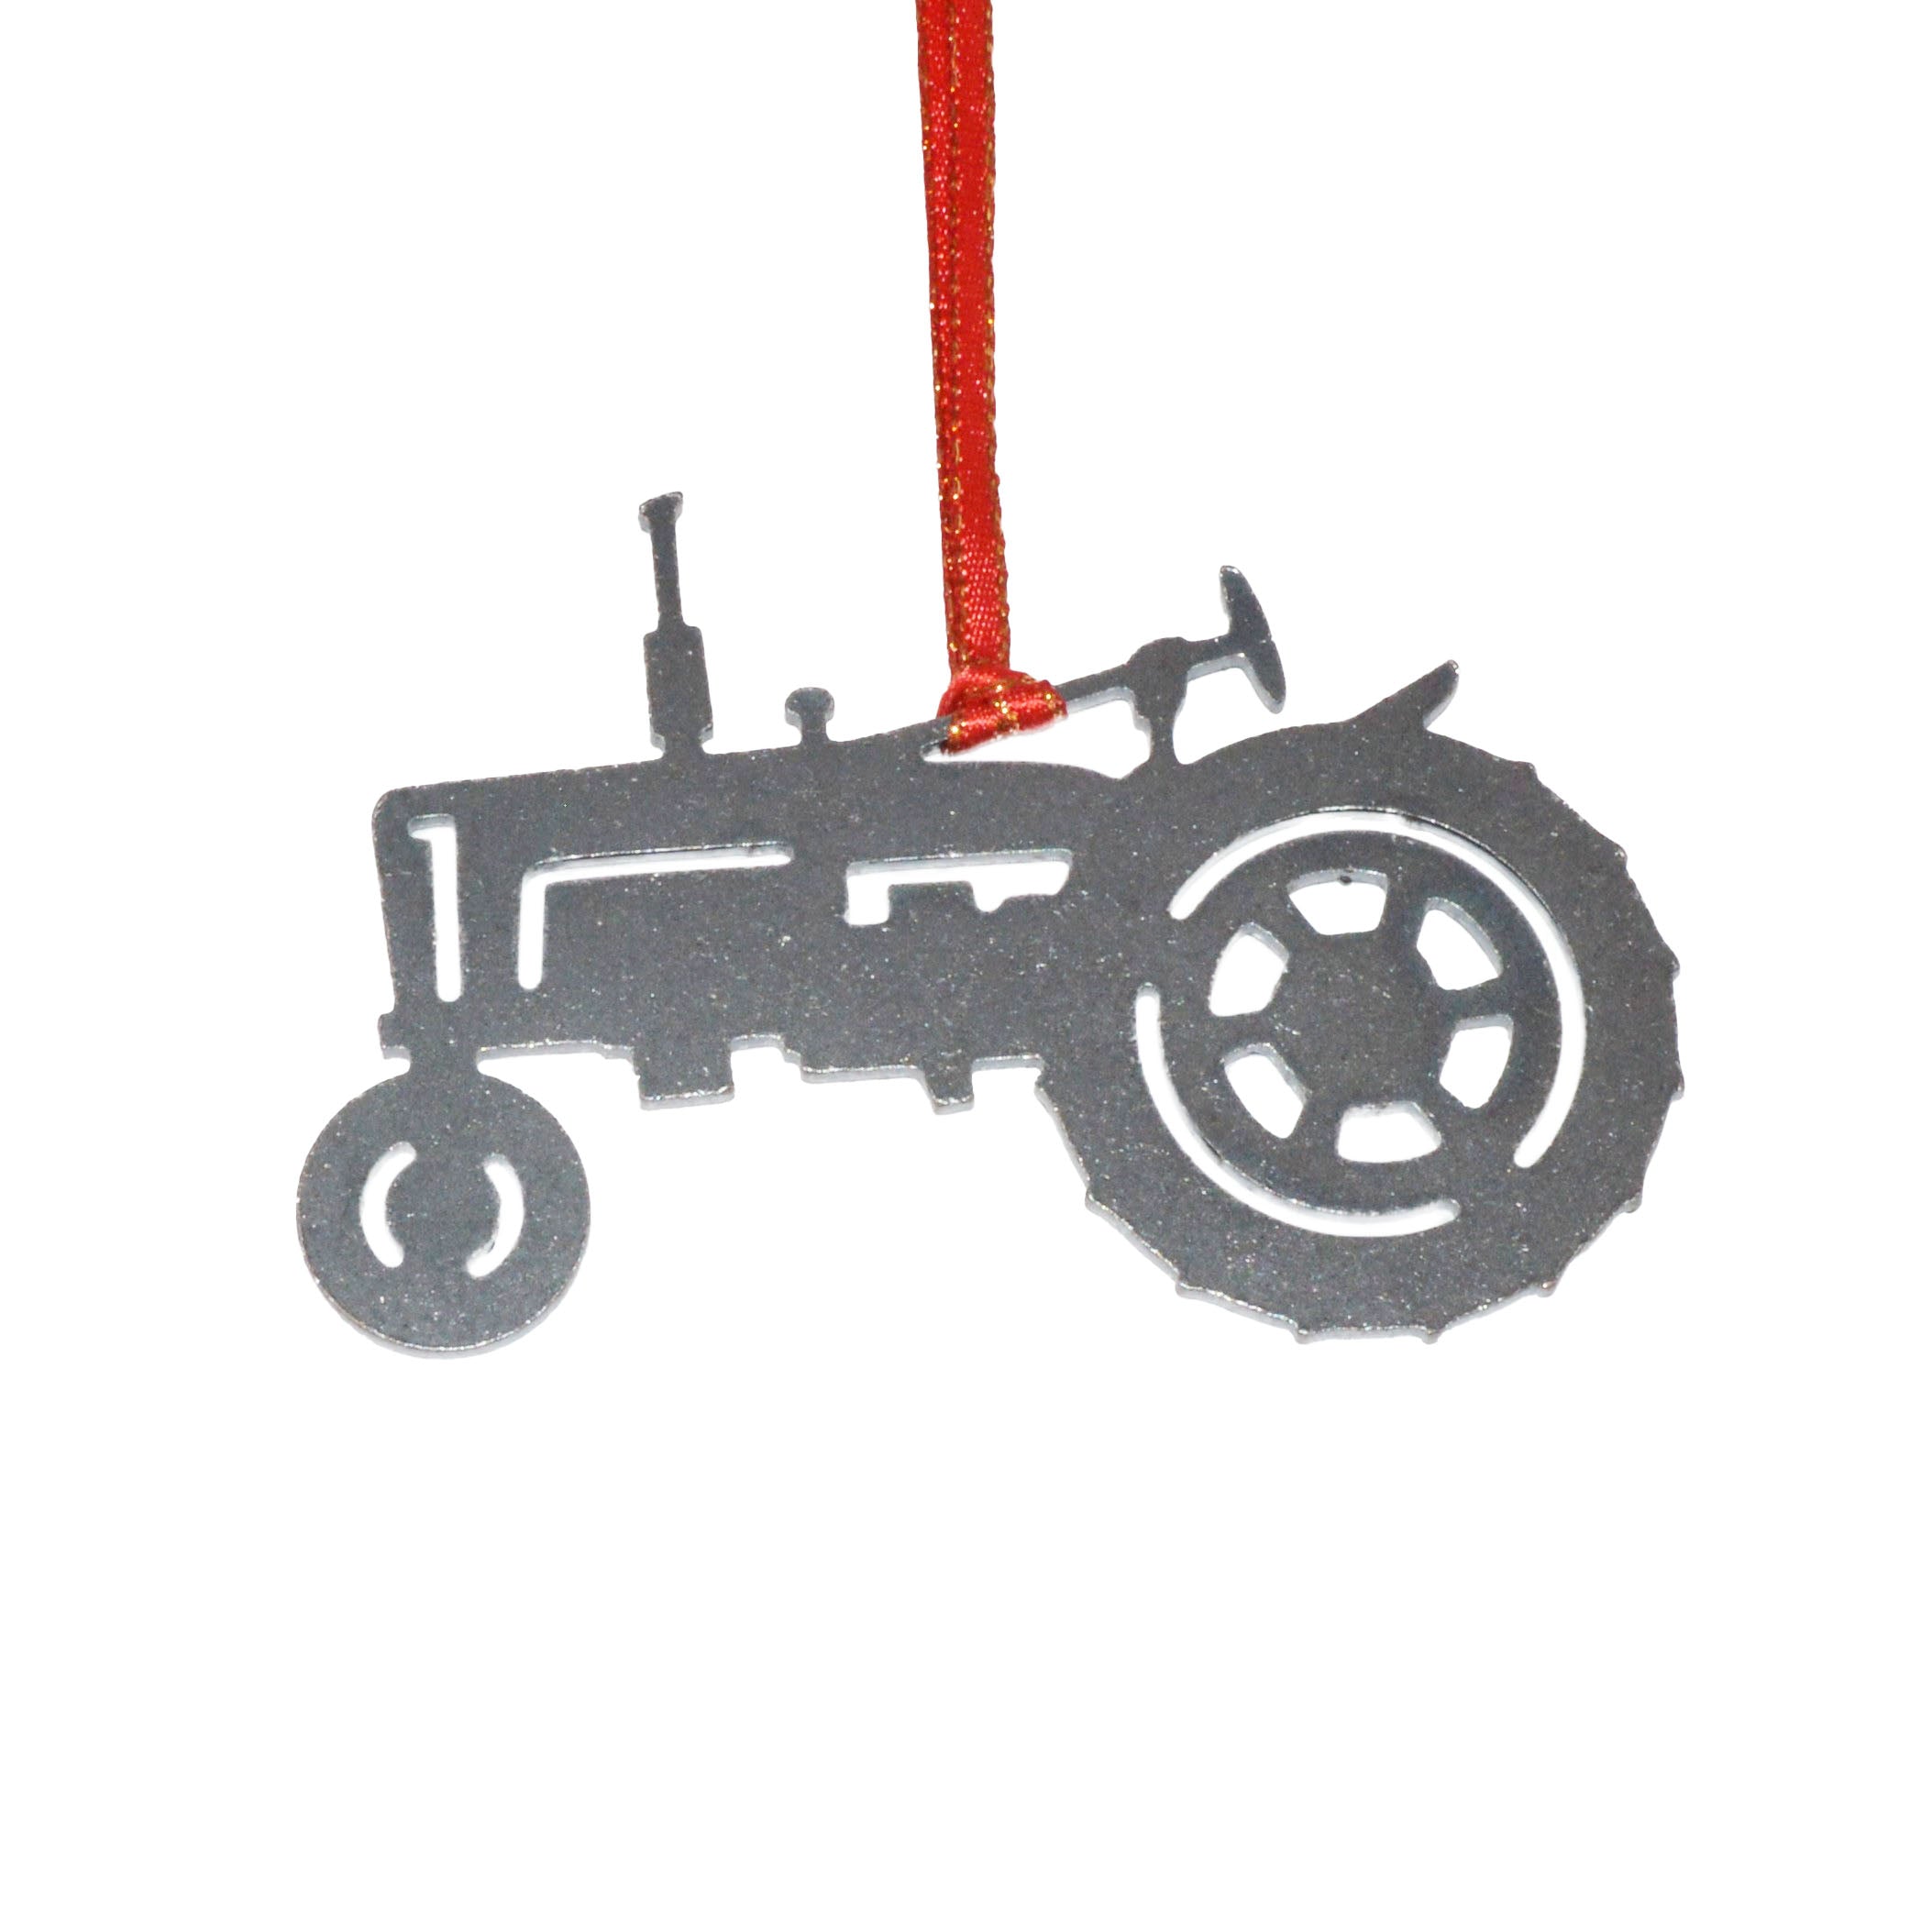 vintage tractor silhouette